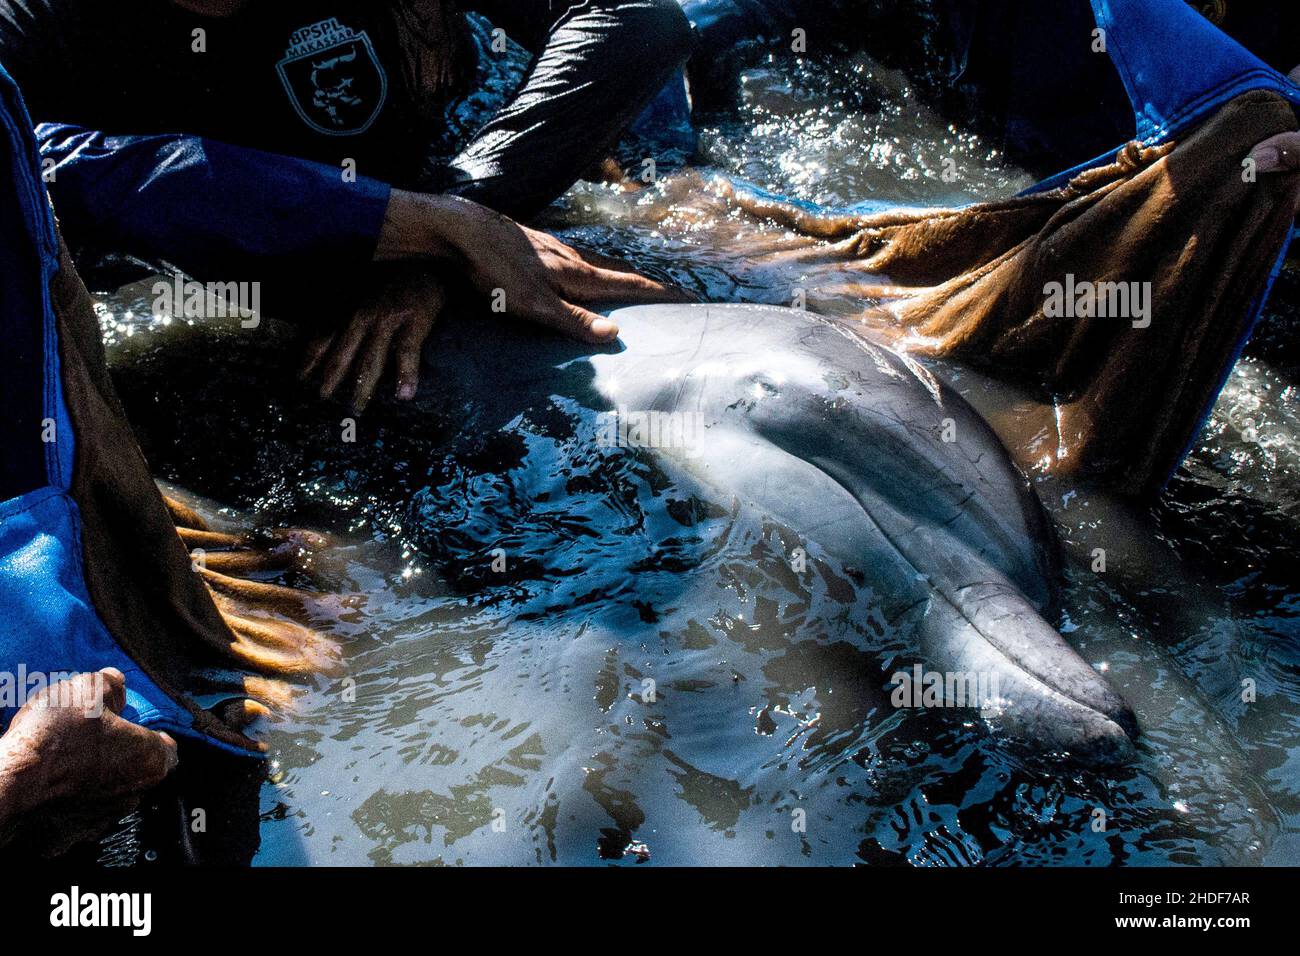 Beijing, Indonesia. 30th Apr, 2021. Officials from South Sulawesi Natural Resources Conservancy Center (BKSDA) try to release a two-meter long rough-toothed dolphin which is stranded at a fishing farm in Maros district, South Sulawesi, Indonesia, April 30, 2021. Credit: Niaz Sharief/Xinhua/Alamy Live News Stock Photo